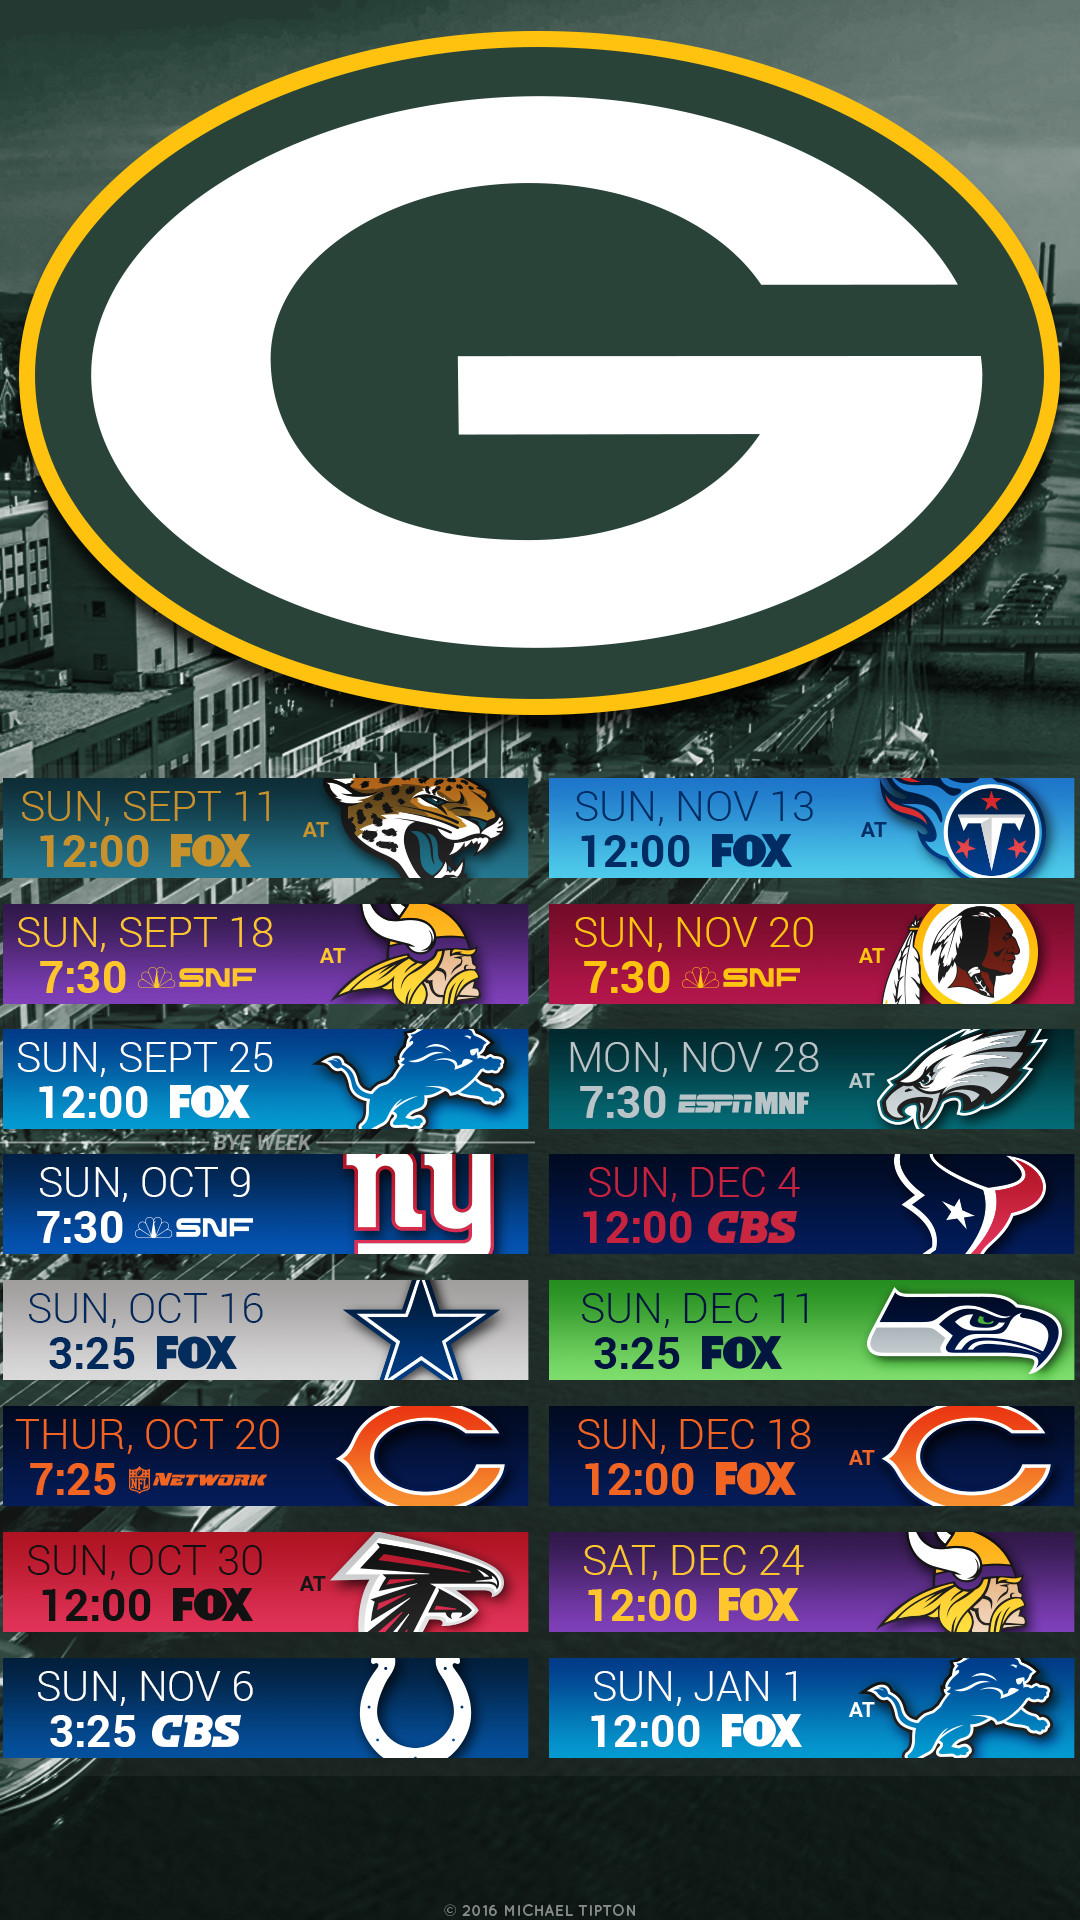 The Highest Quality Green Bay Packers Football Schedule Wallpapers and Logo Backgrounds for iPhone, Andriod, Galaxy, and Desktop PC